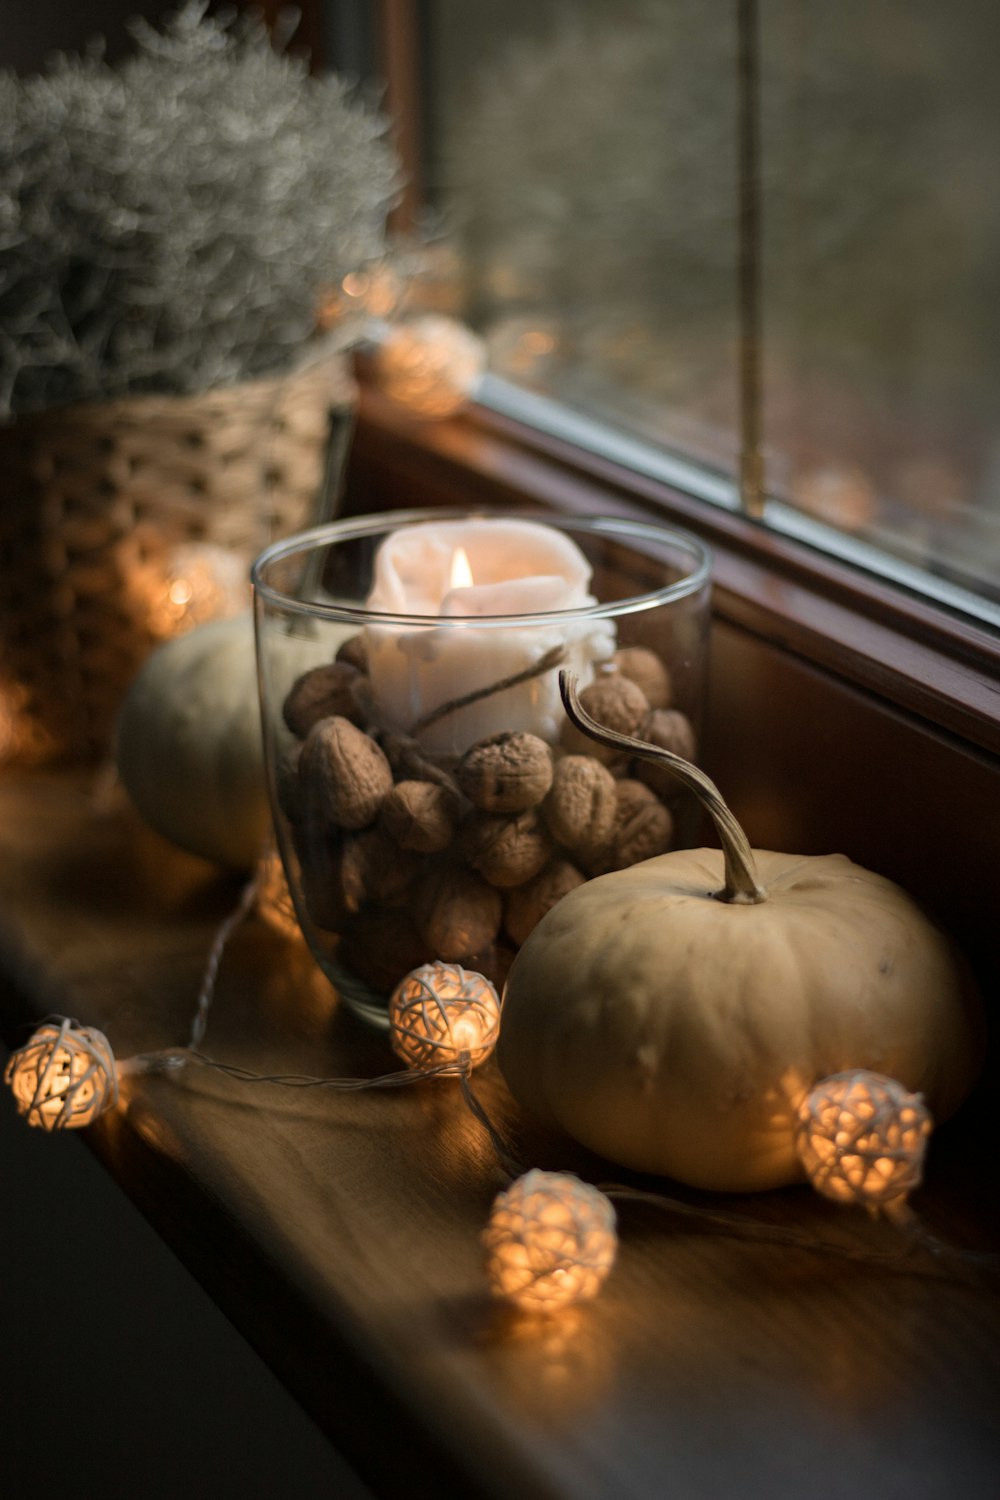 a window sill with a candle and some pumpkins